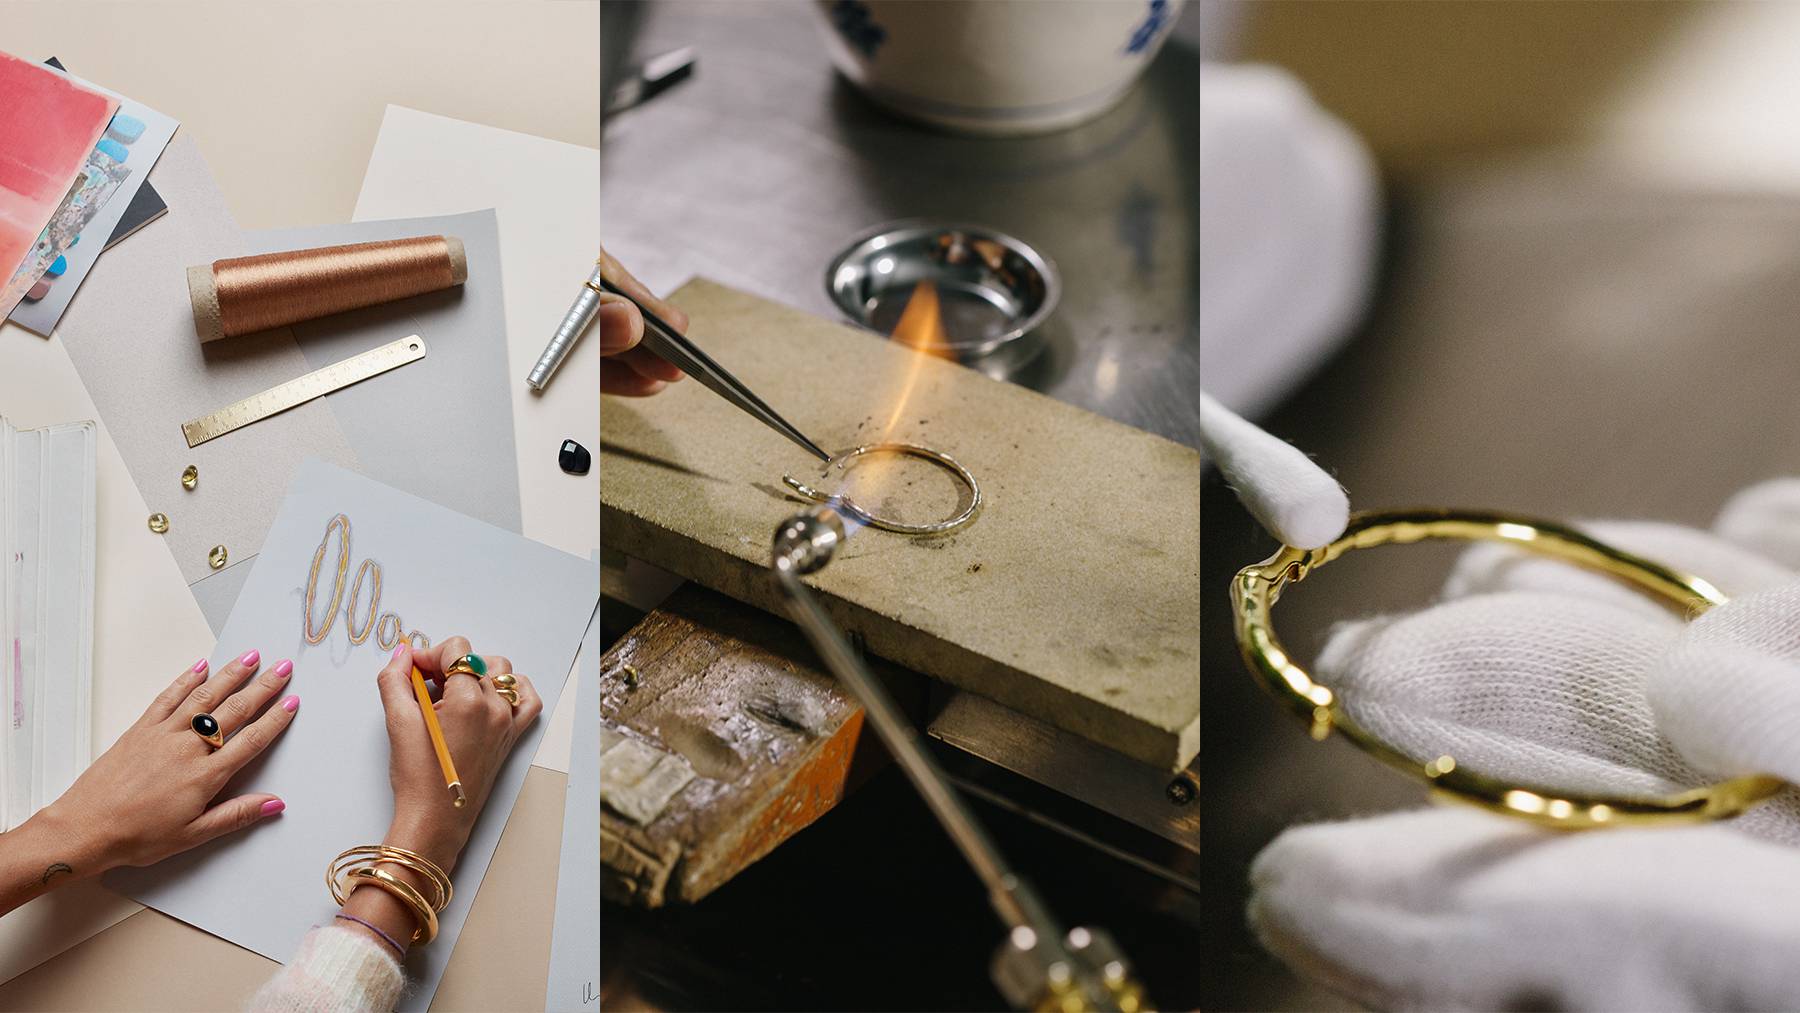 Where Does Your Necklace Come From? | BoF